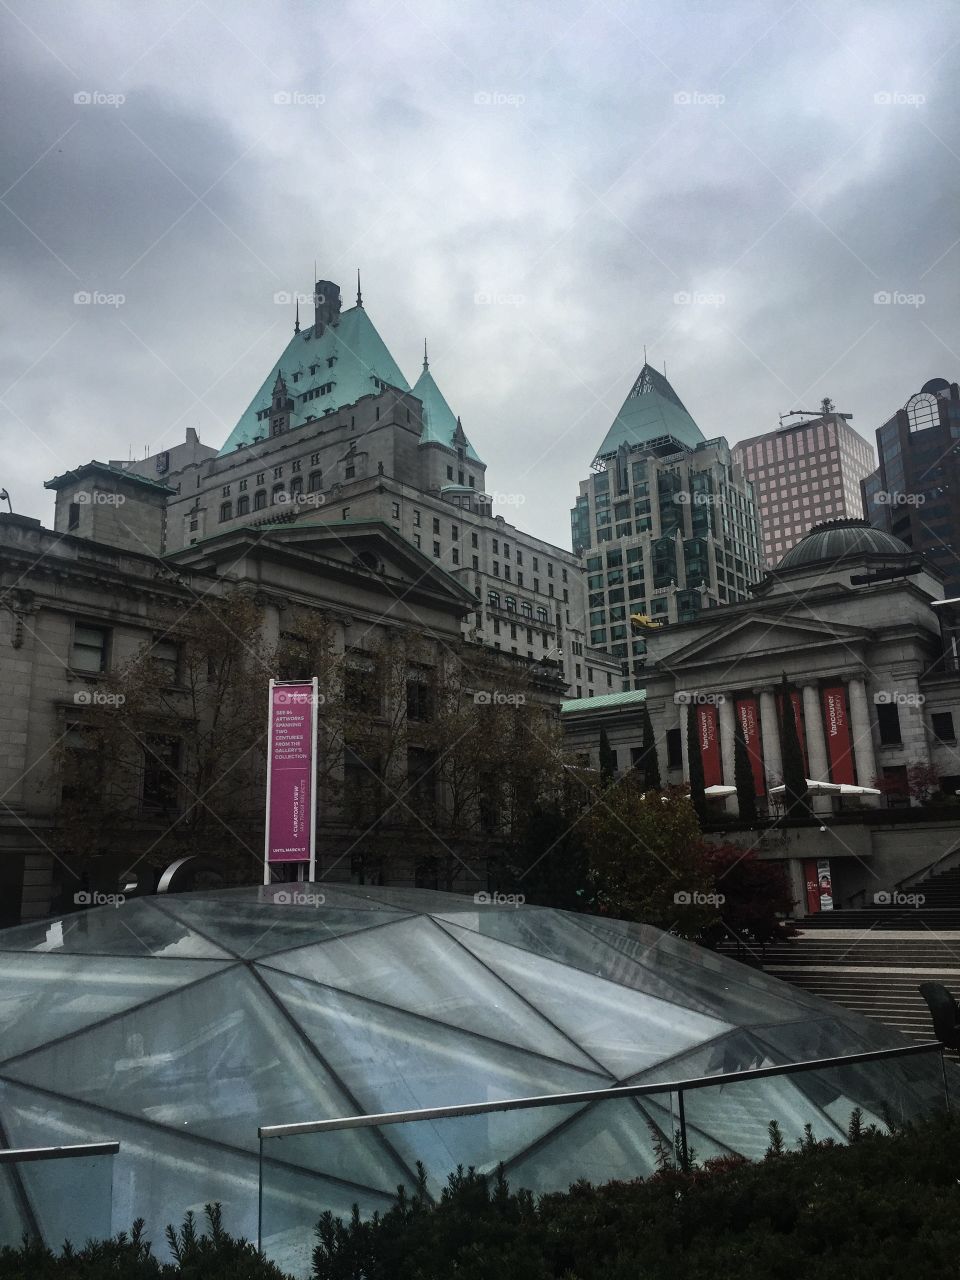 Vancouver Art Gallery over Robson Square on a cloudy autumn day in Vancouver, British Columbia 